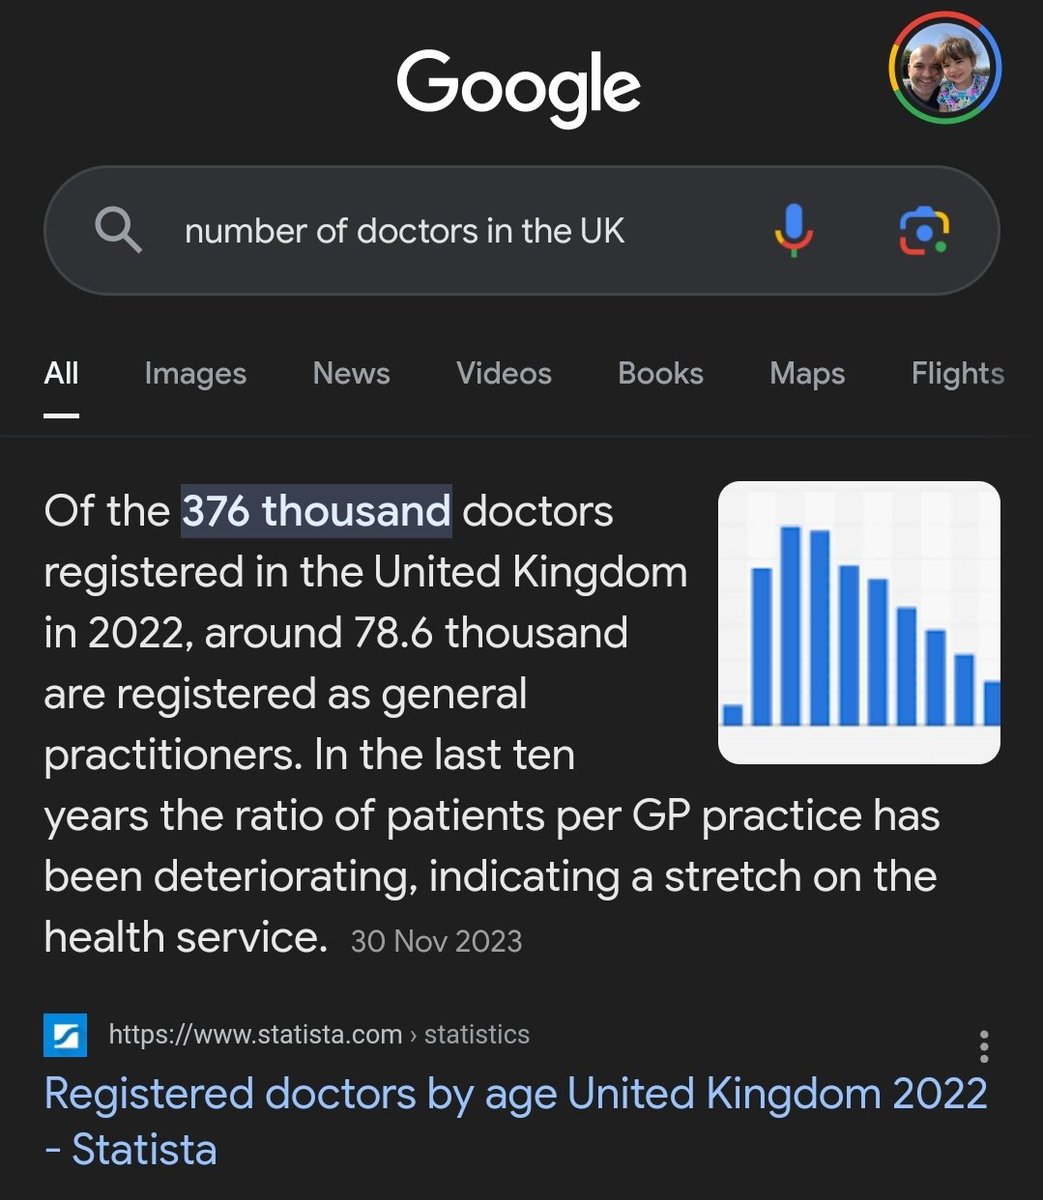 Of the 376000 doctors in the UK, how many have spoken out against - Lockdowns Mandates The mRNA jabs Vaccine harms and lack of safety Statins/anti-depressants/PSSD NHS failings The trans agenda Destruction of medical ethics The problems with Big Food & Big Pharma? 😏